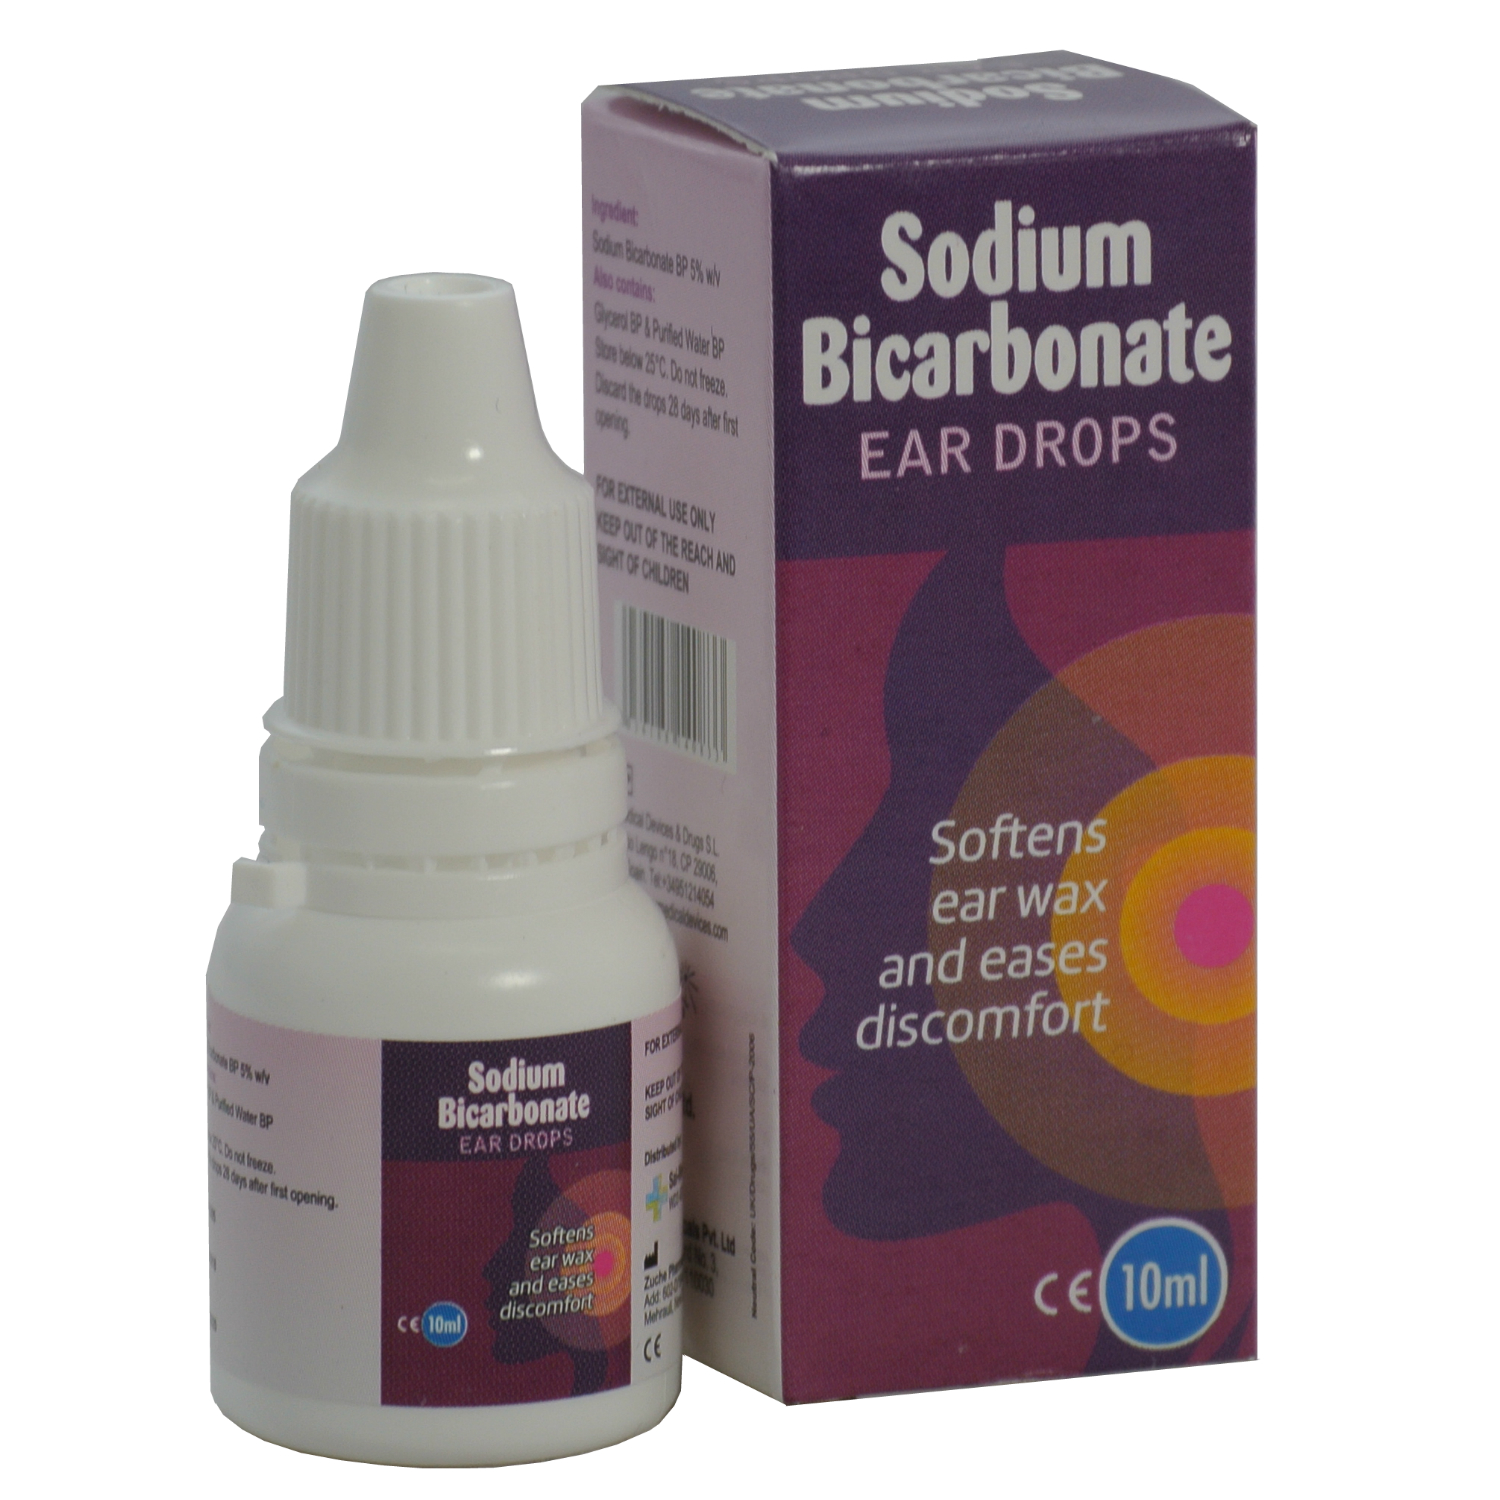 Sodium Bicarbonate Ear Drops Softens Ear Wax And Eases Discomfort 5%w/v